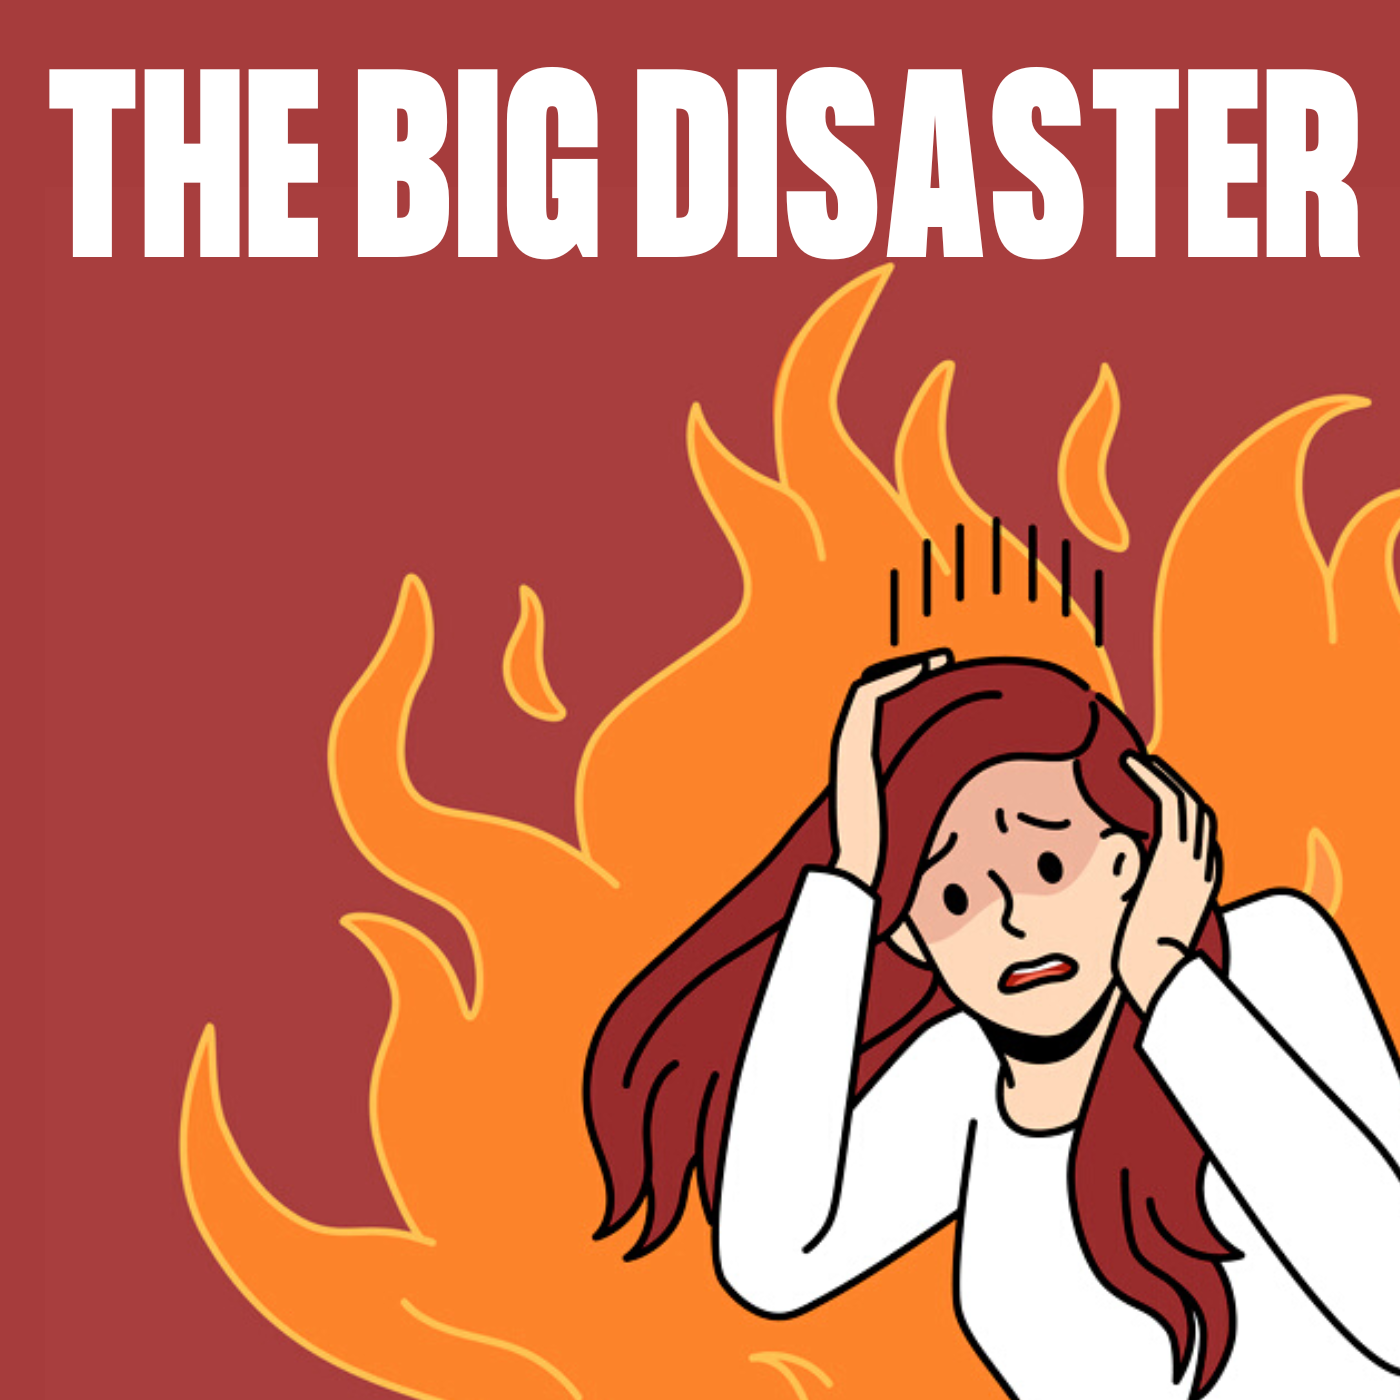 S1:E1 - The Big Disaster: Is Your Organization Ready for the Next Major Catastrophe?